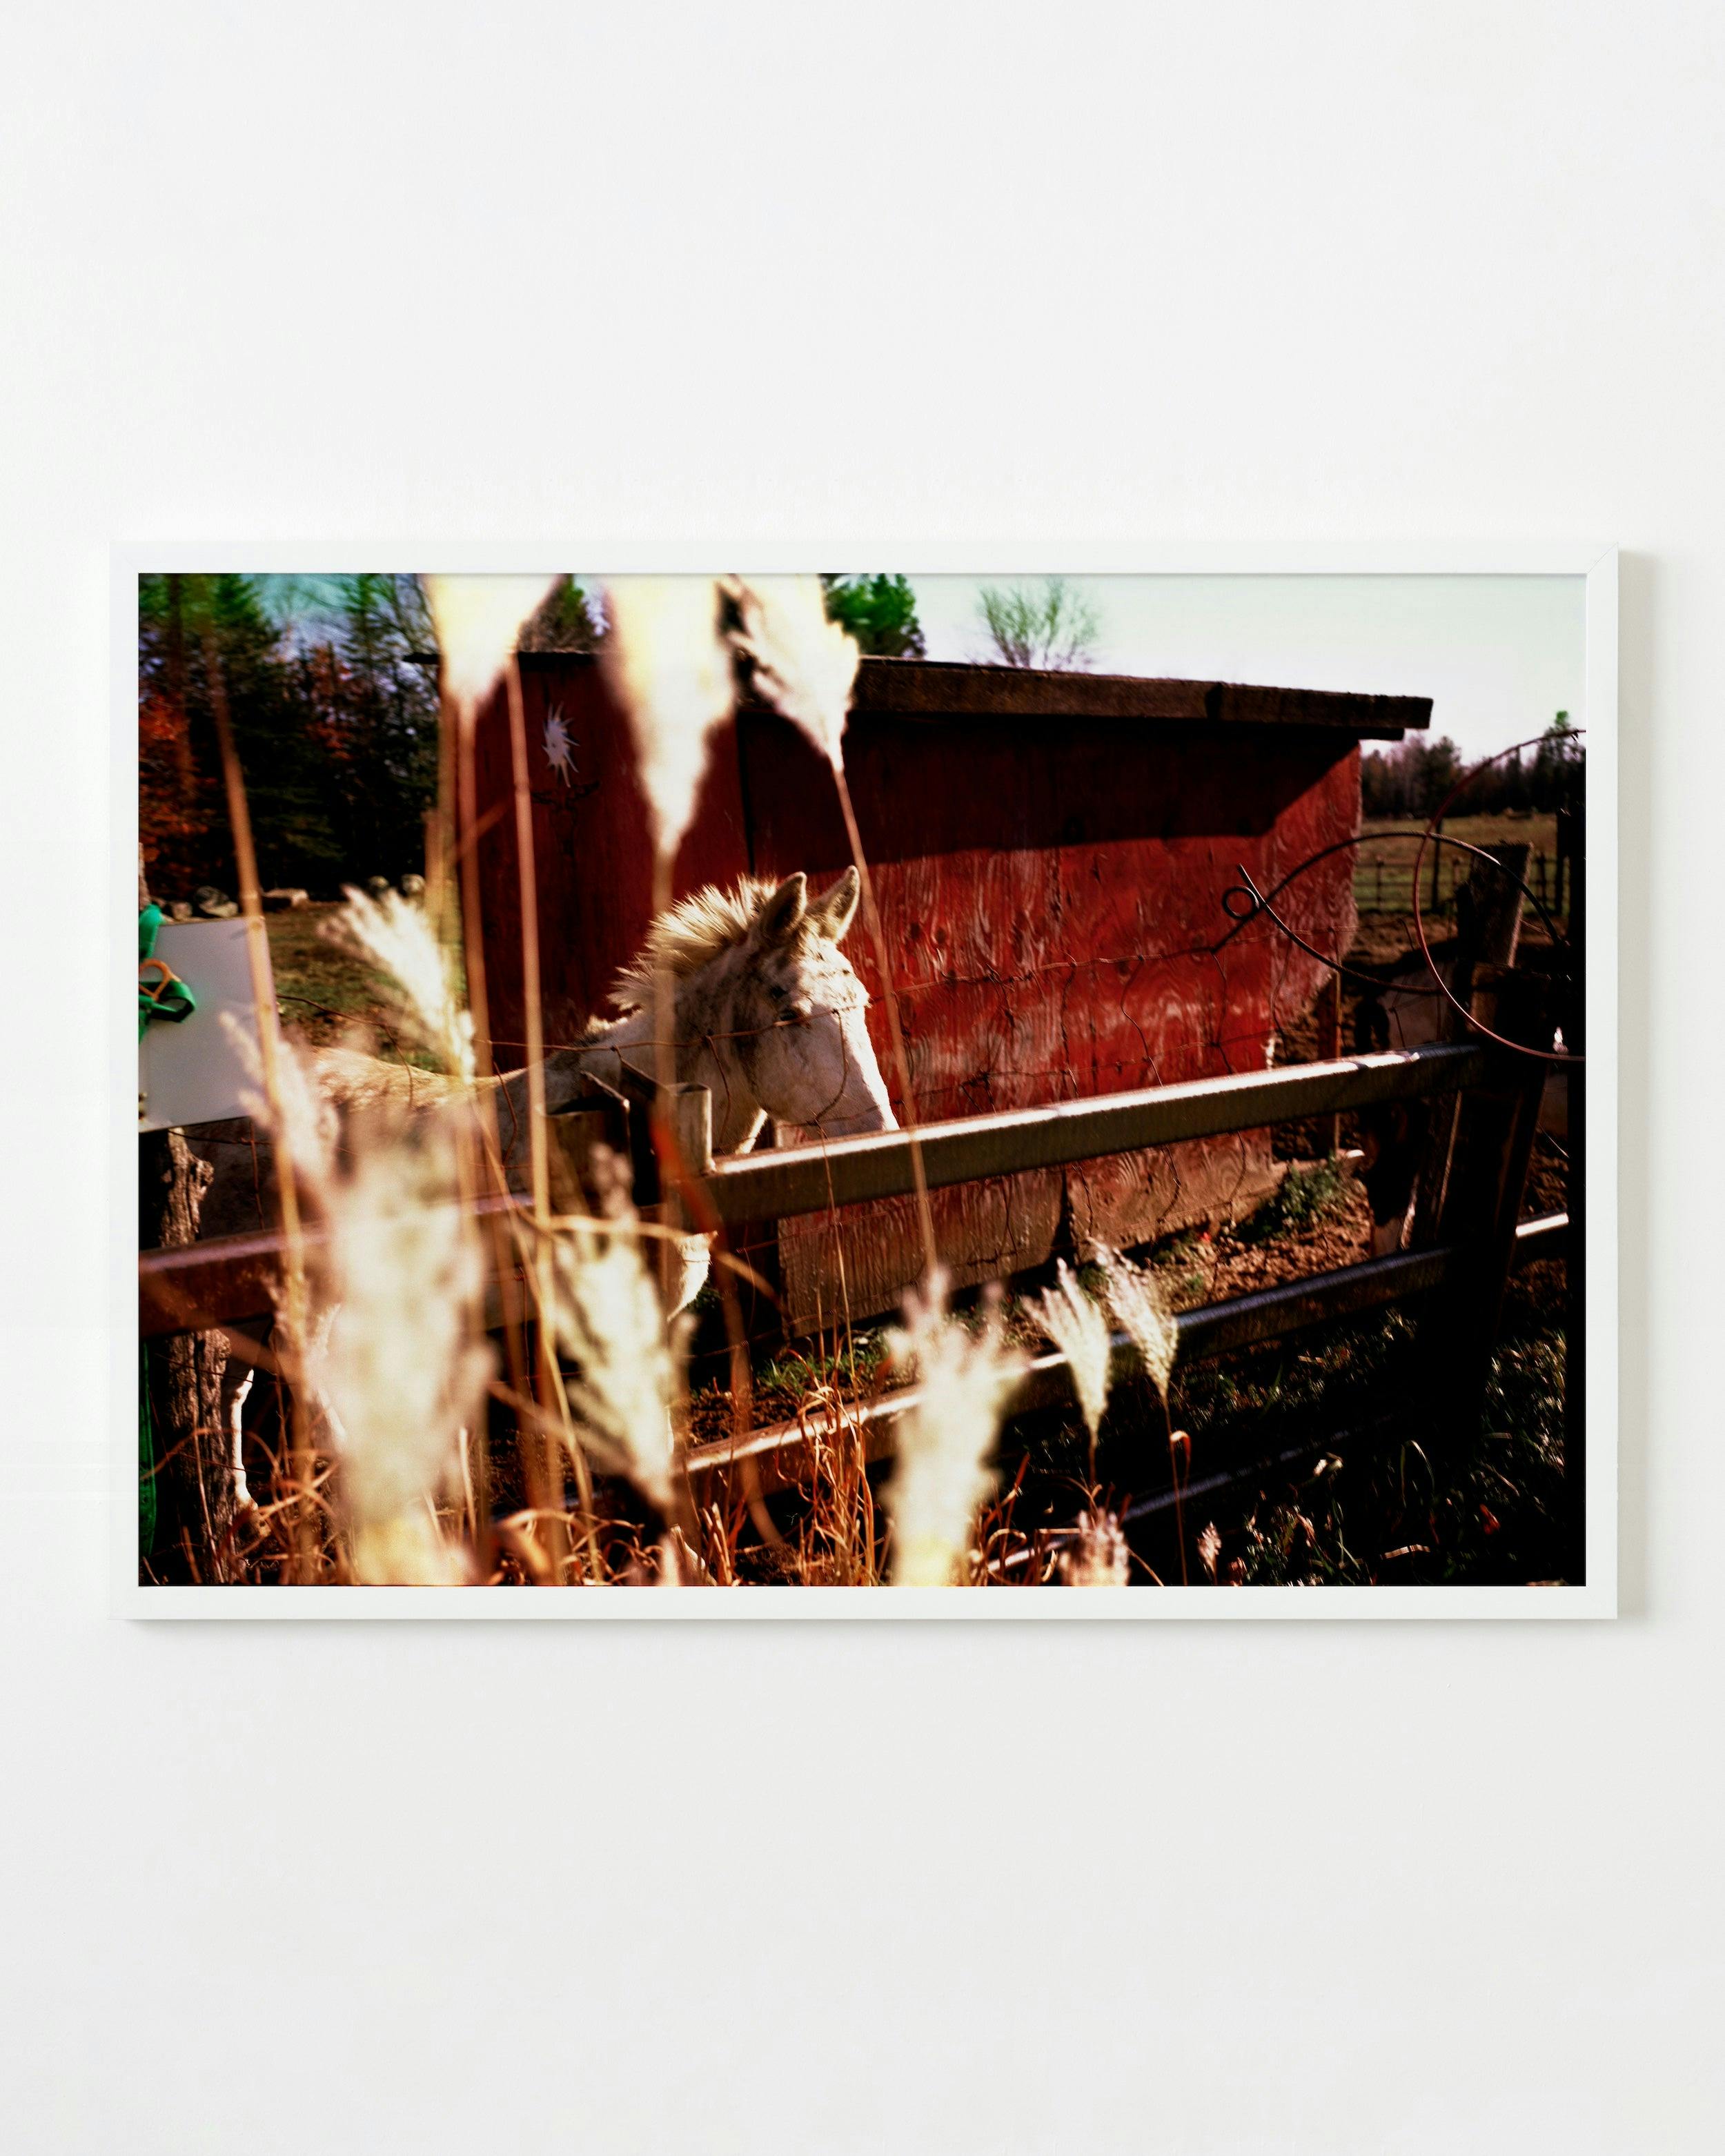 Photography by Anna Moller titled "Red Barn".